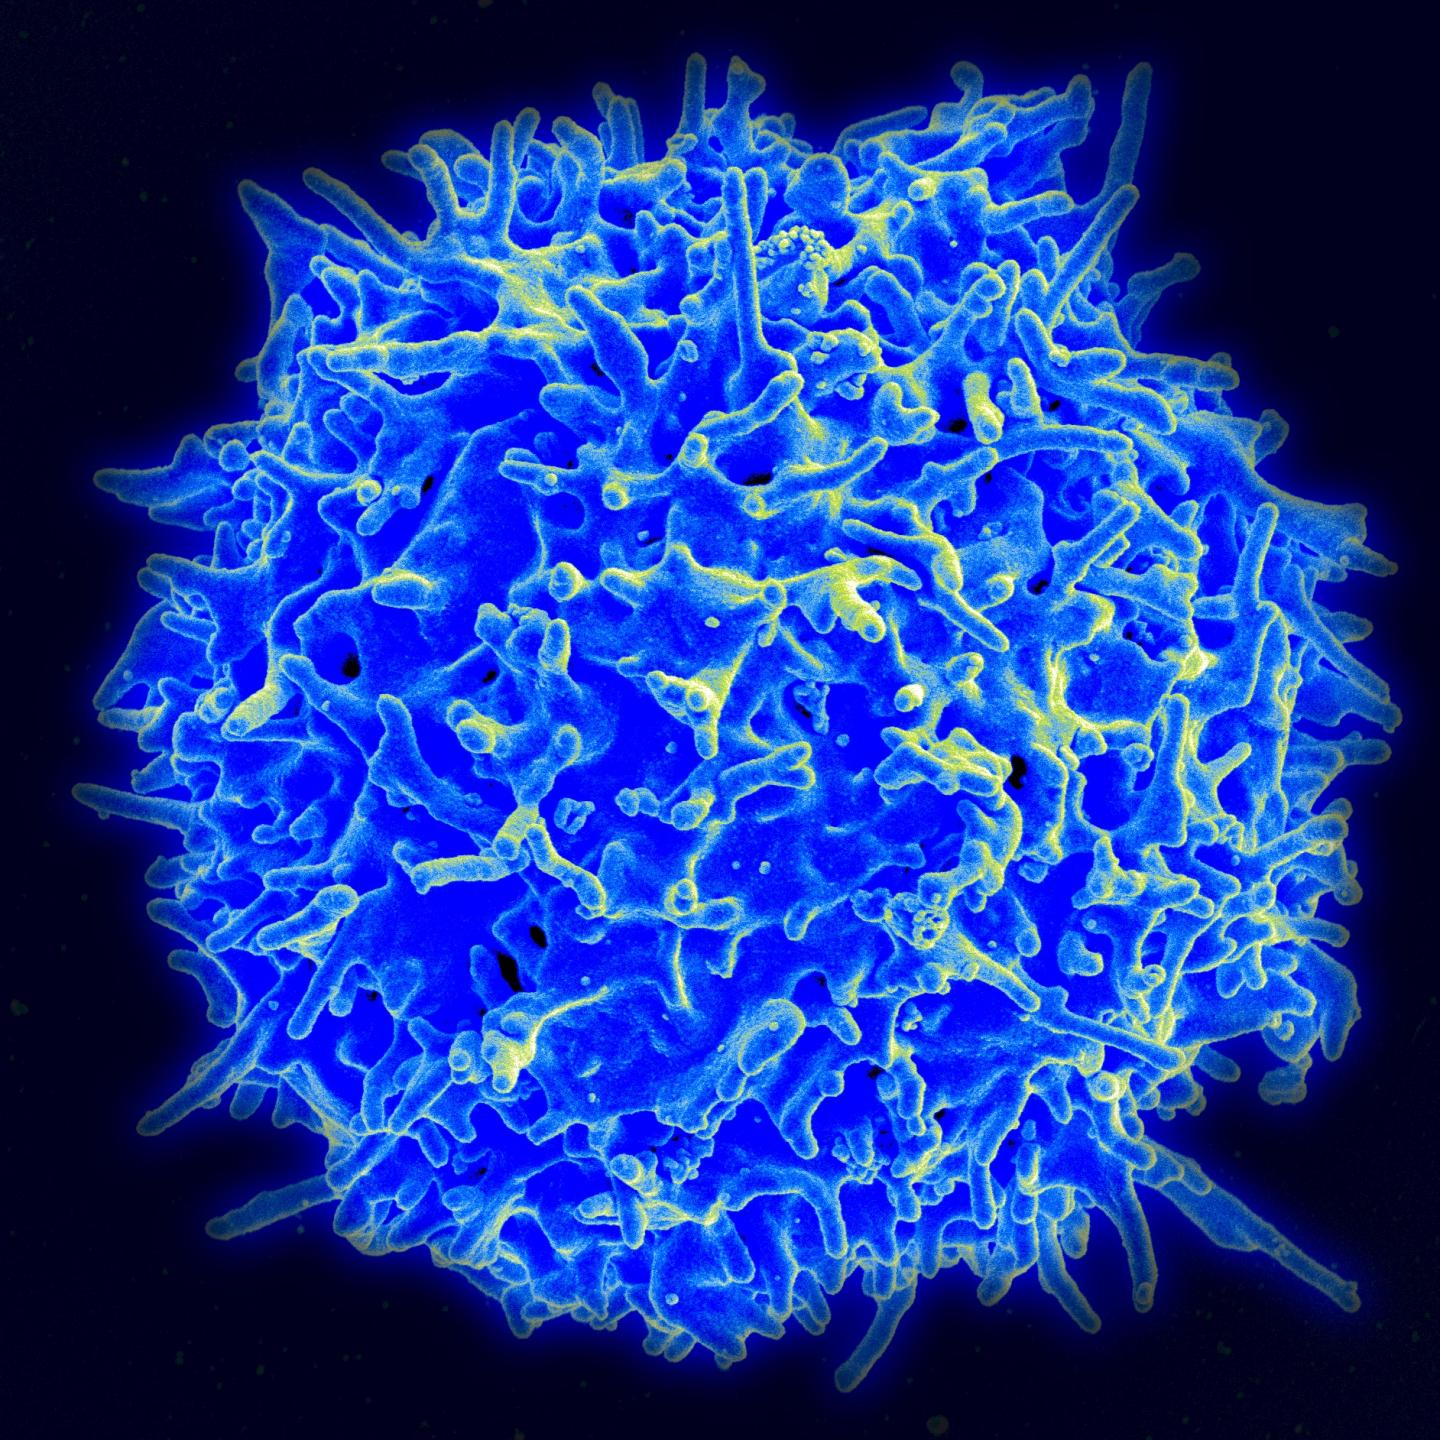 Human T Cell